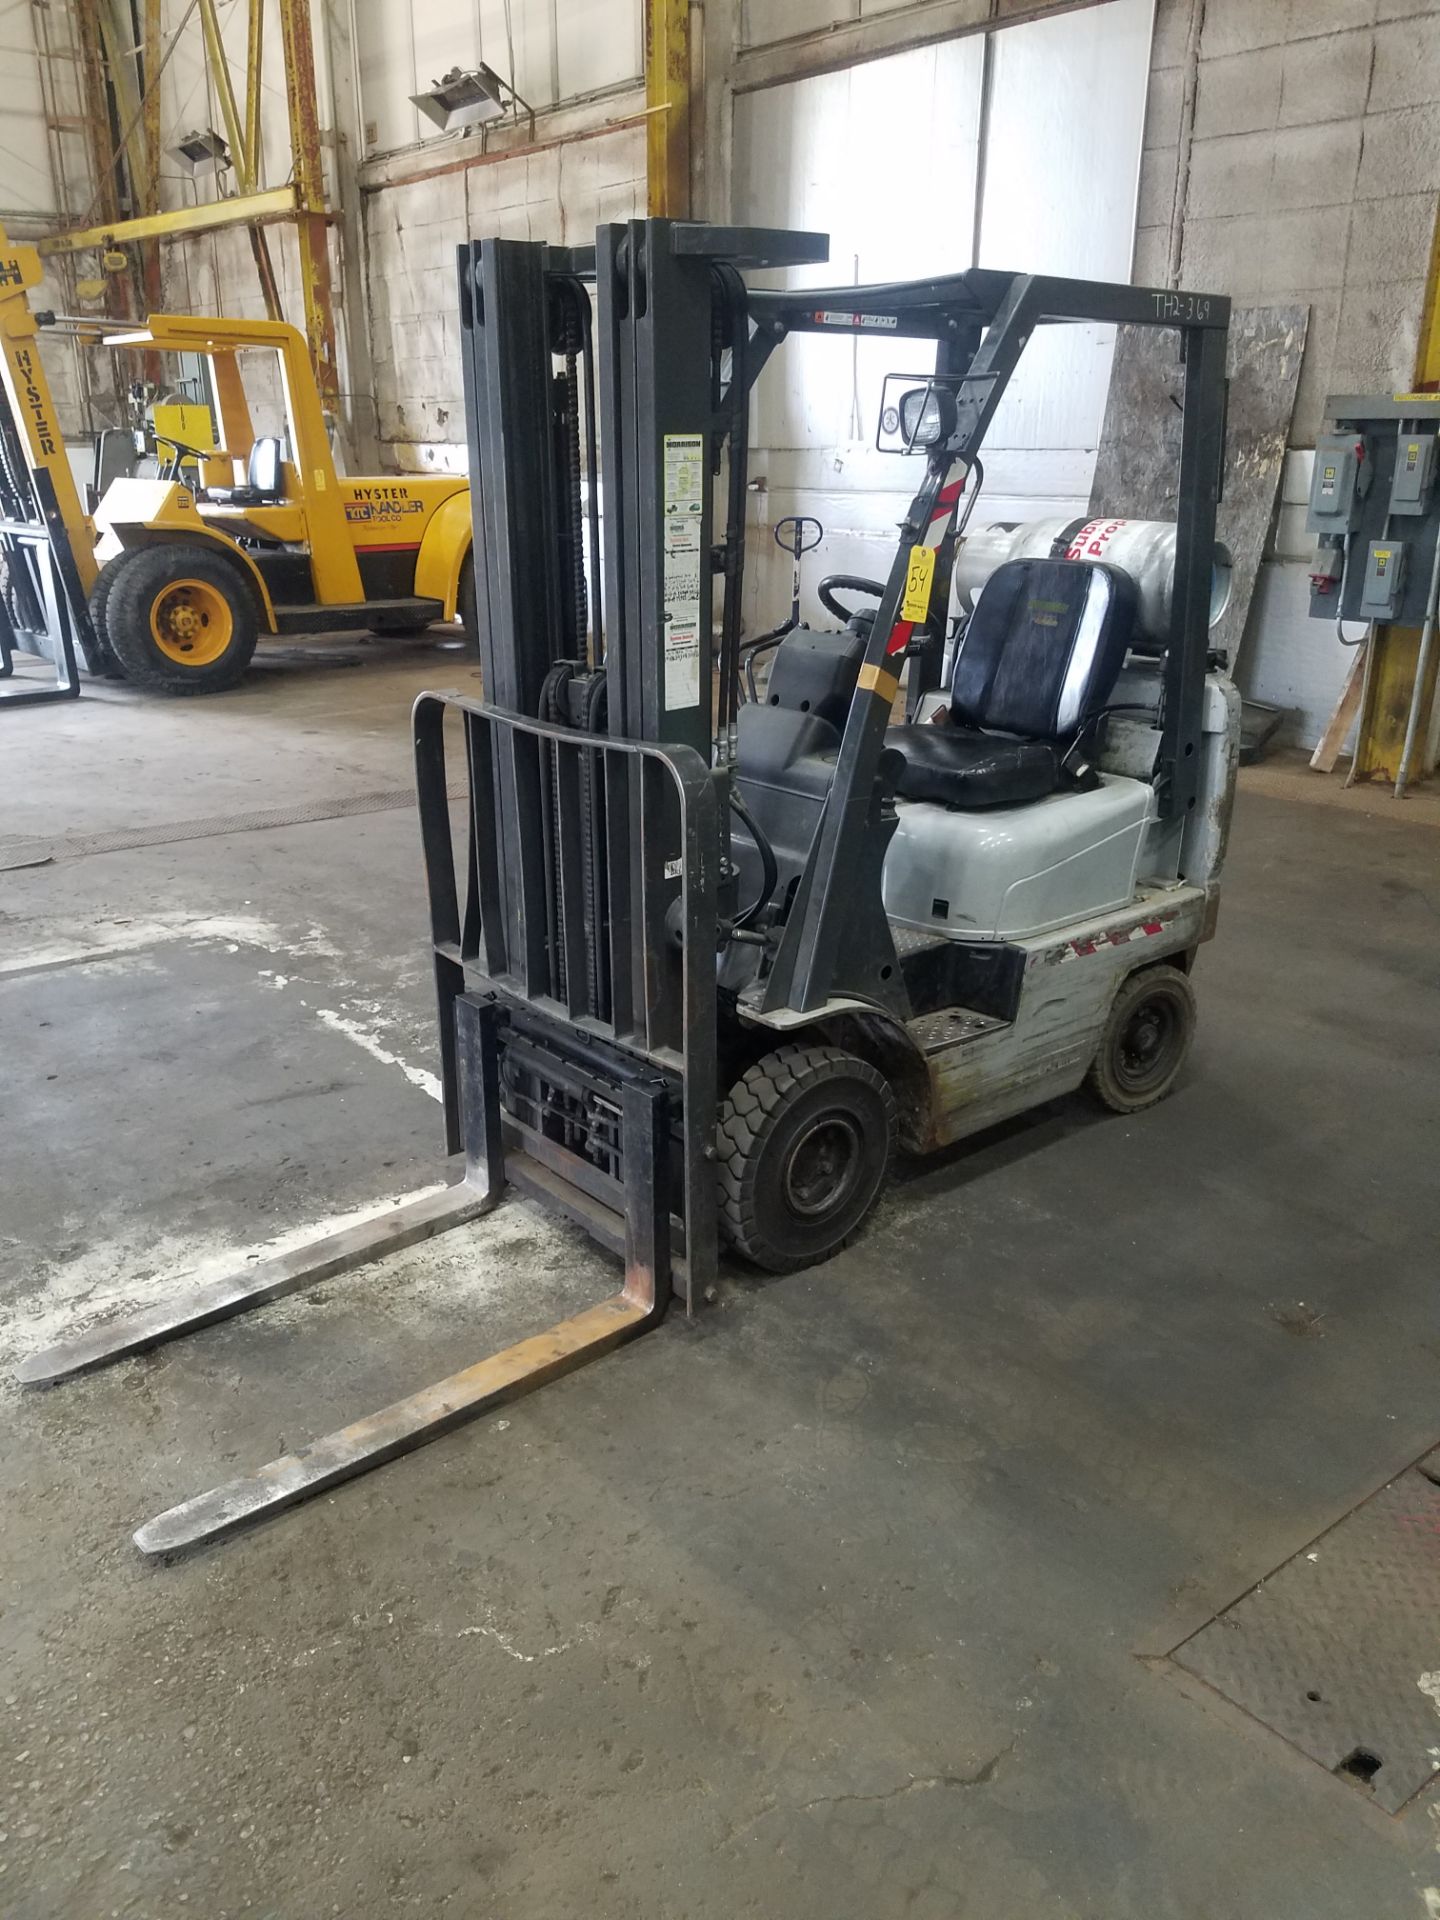 Nissan Model MAP1F1A15LV Fork Lift, s/n AP1F1-9T0369, 2,400 Lb. Capacity, LP, Hard Tire, Cage, - Image 3 of 4